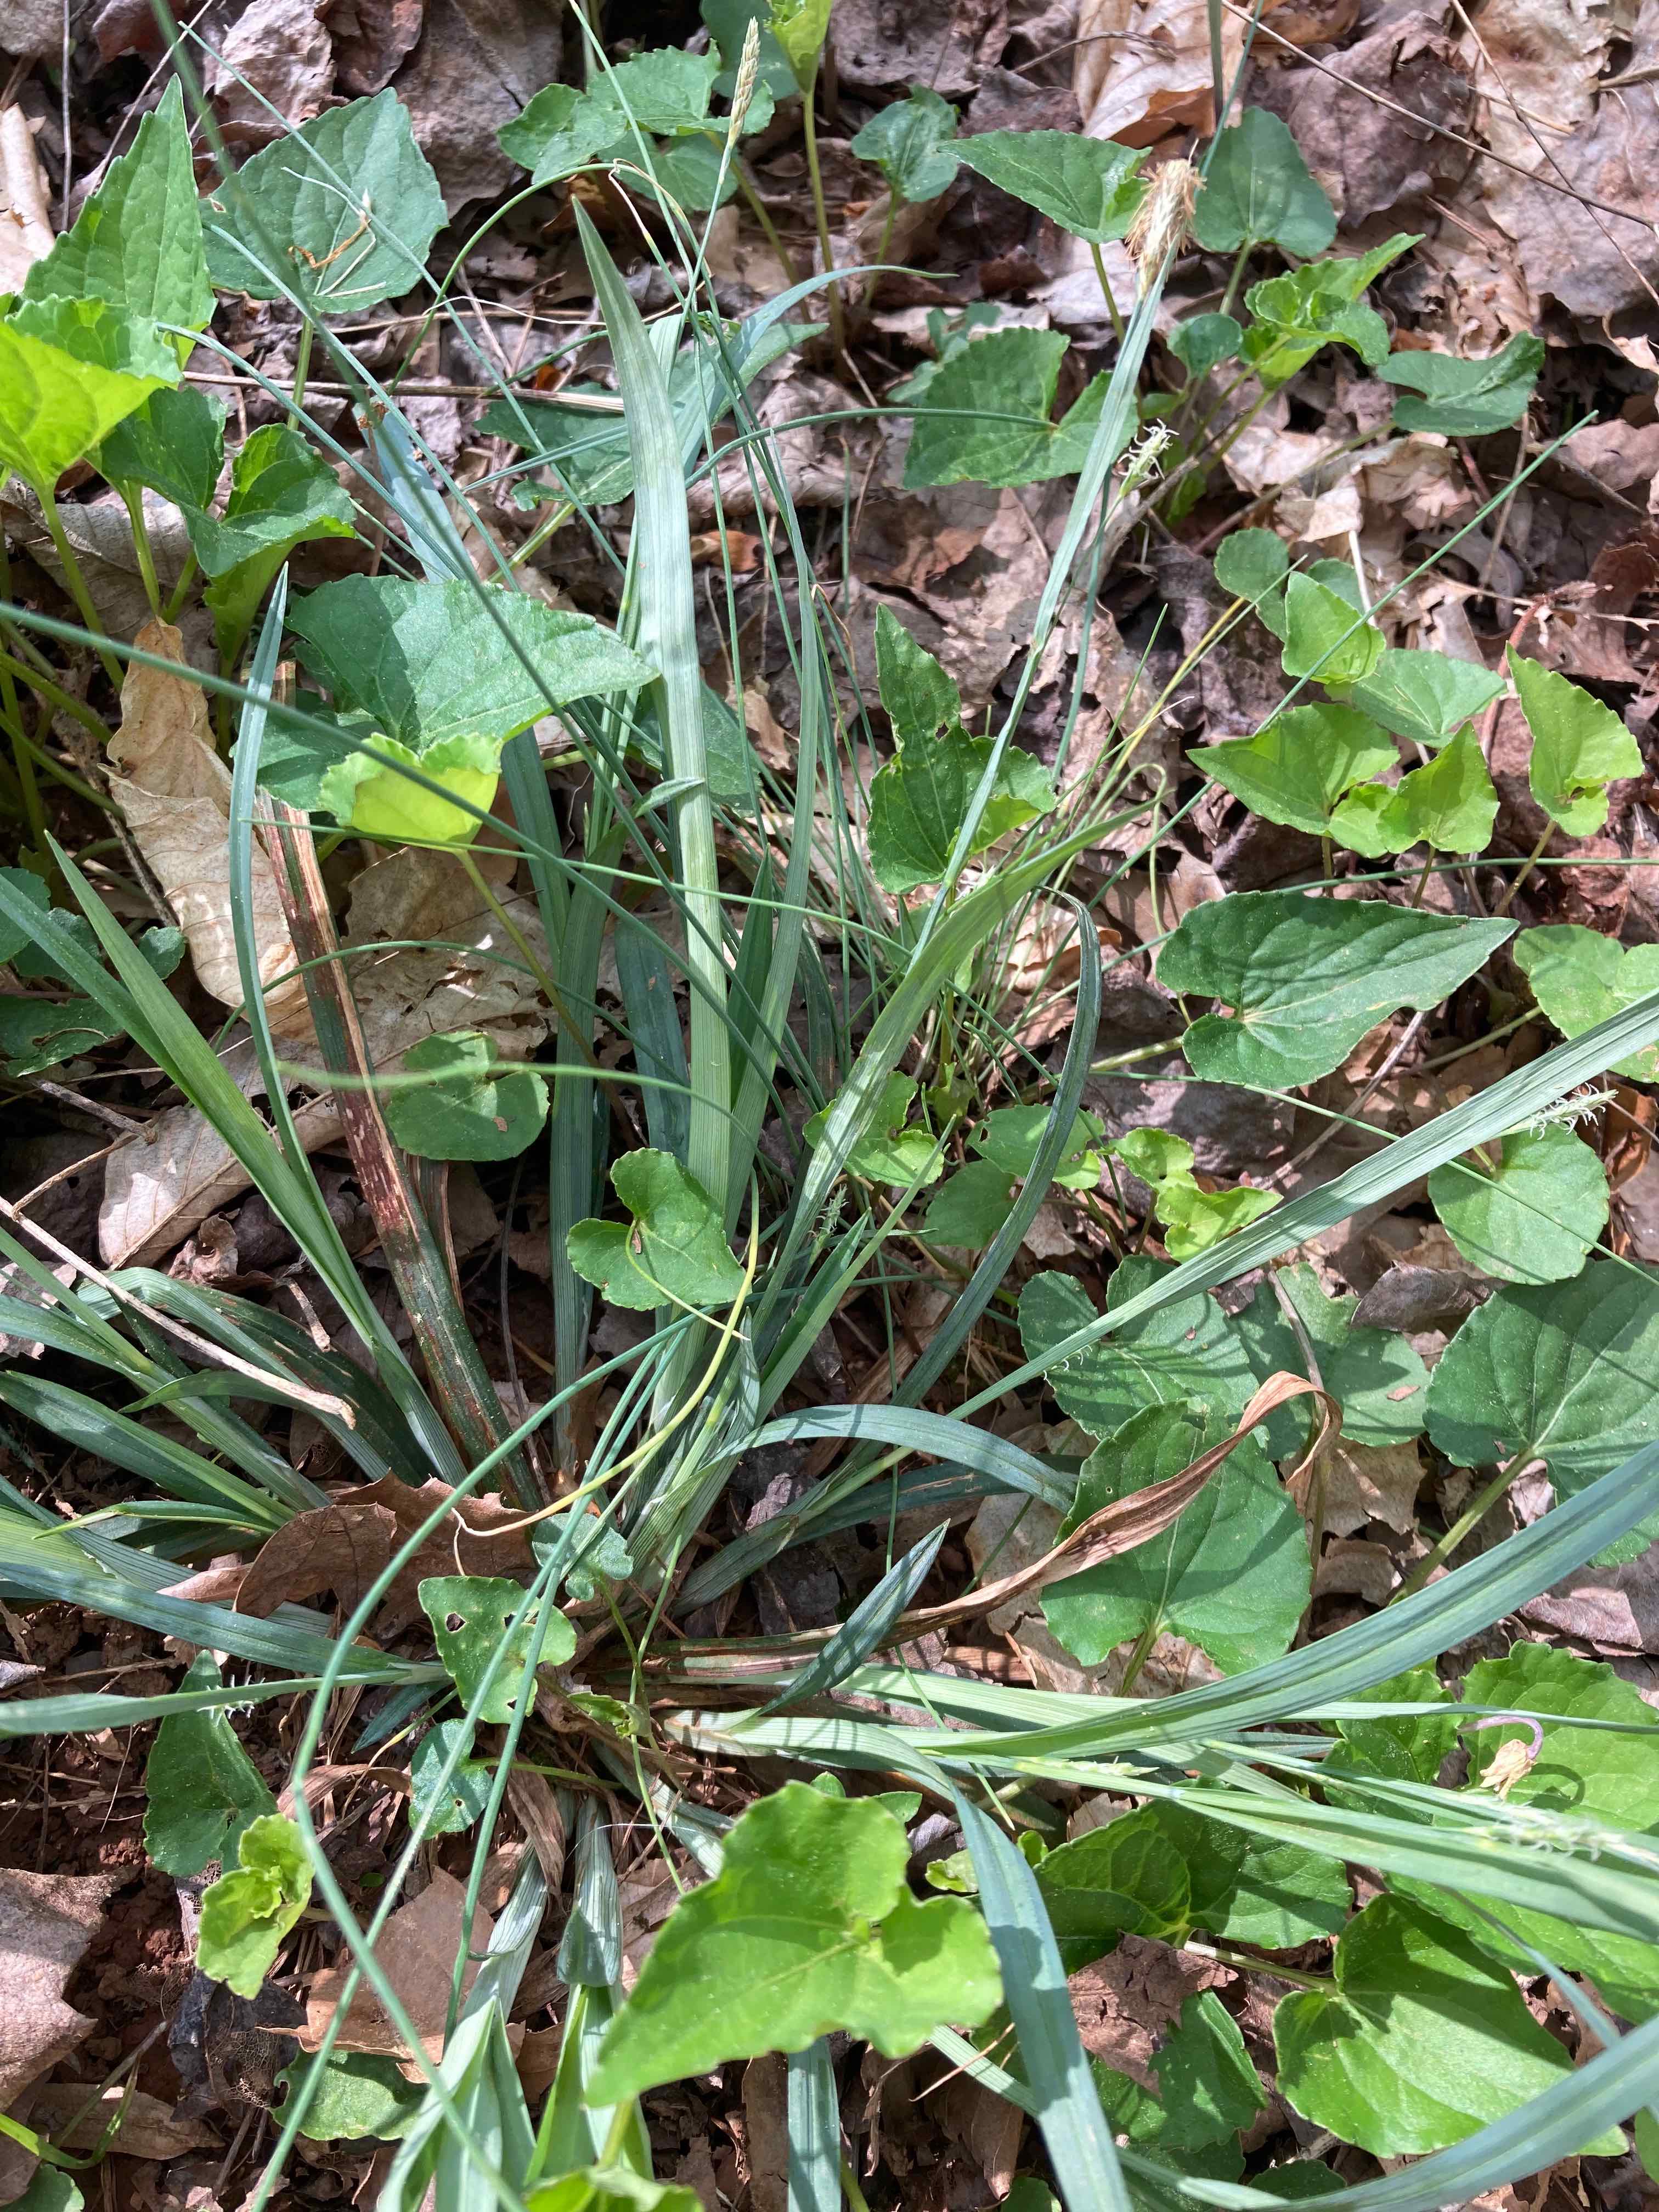 The Scientific Name is Carex flaccosperma. You will likely hear them called Meadow Sedge, Blue Wood Sedge. This picture shows the Glaucous leaves and stems give this sedge a blue color. of Carex flaccosperma